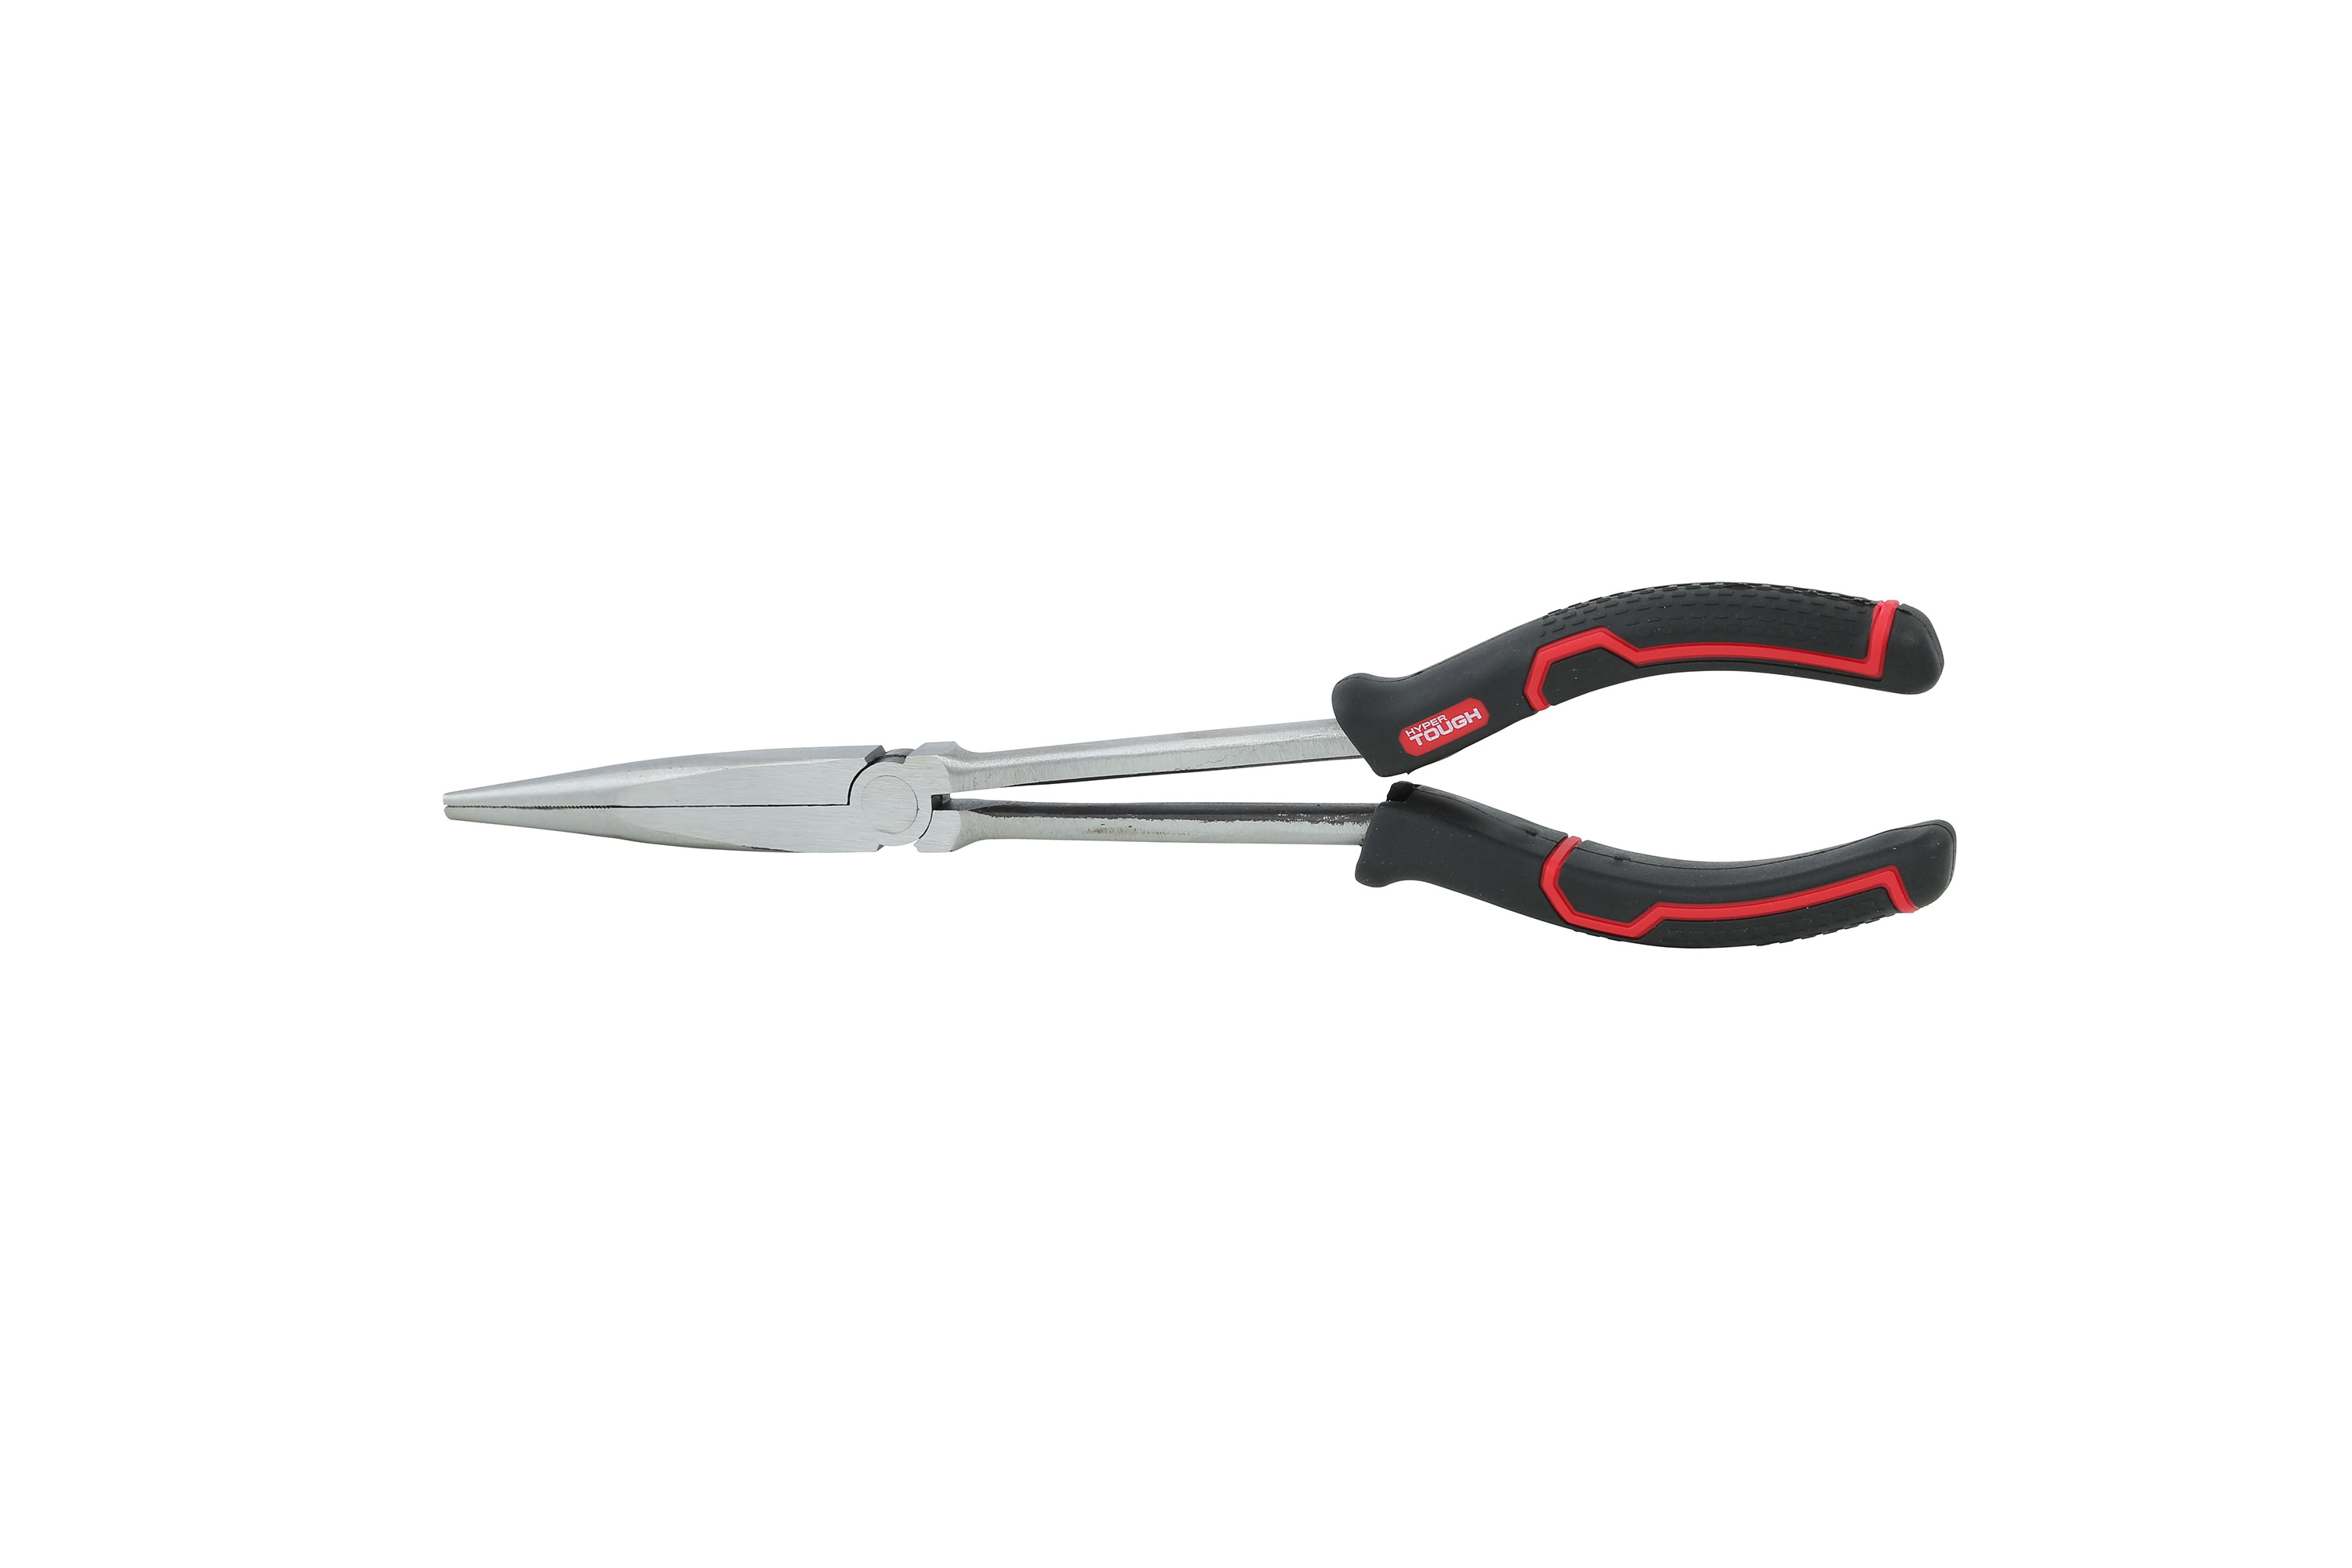 Hyper Tough 11-inch Long Nose Pliers with Ergonomic Comfort Grips